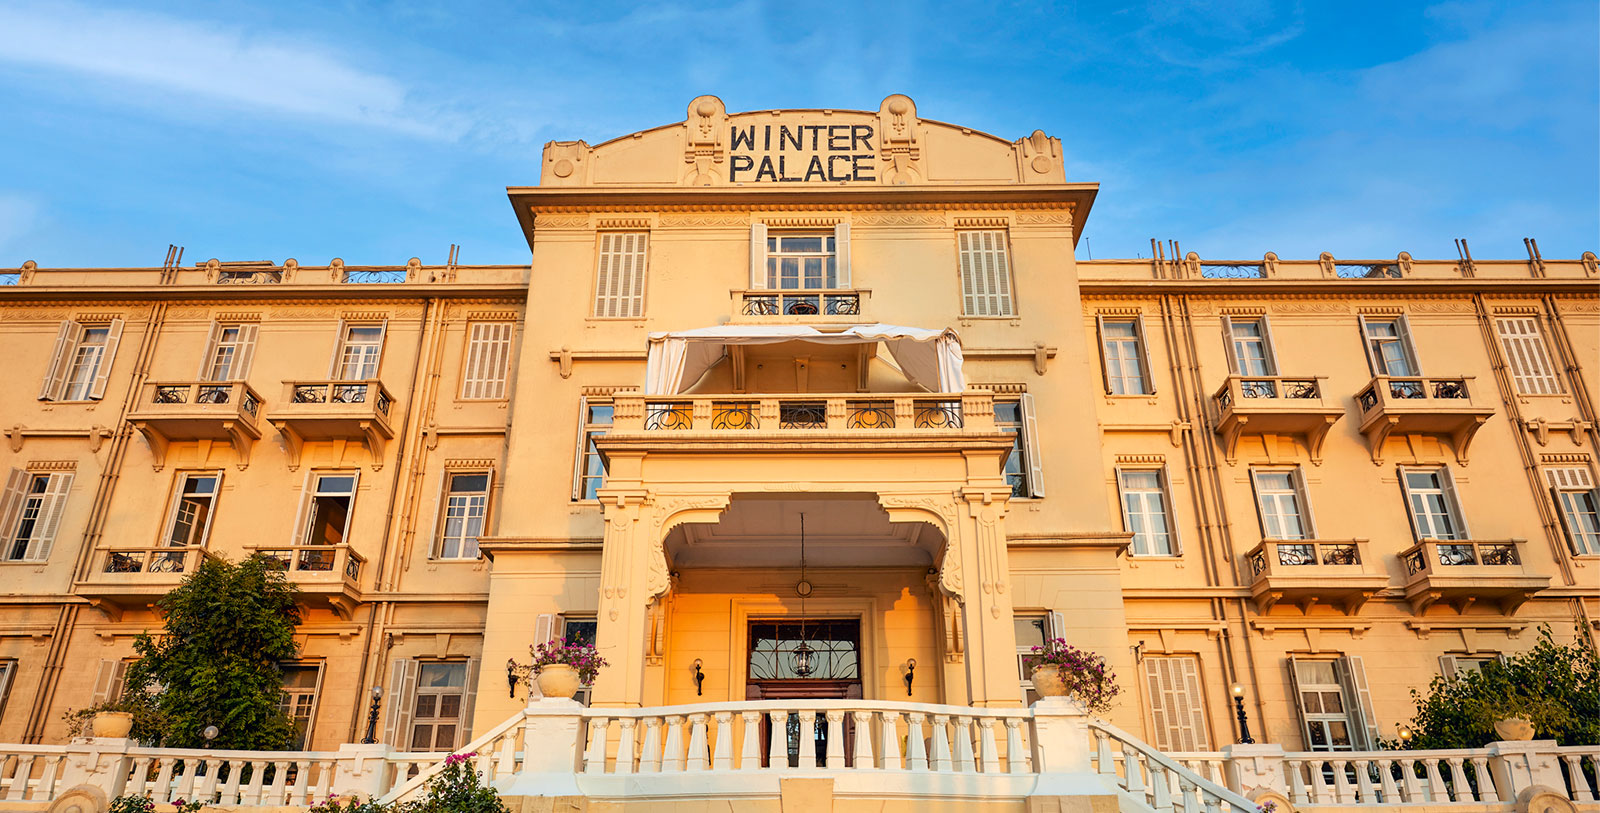 Image of Hotel Front Entrance at Sofitel Winter Palace Luxor, 1886, Member of Historic Hotels Worldwide, in Luxor, Egypt, Overview